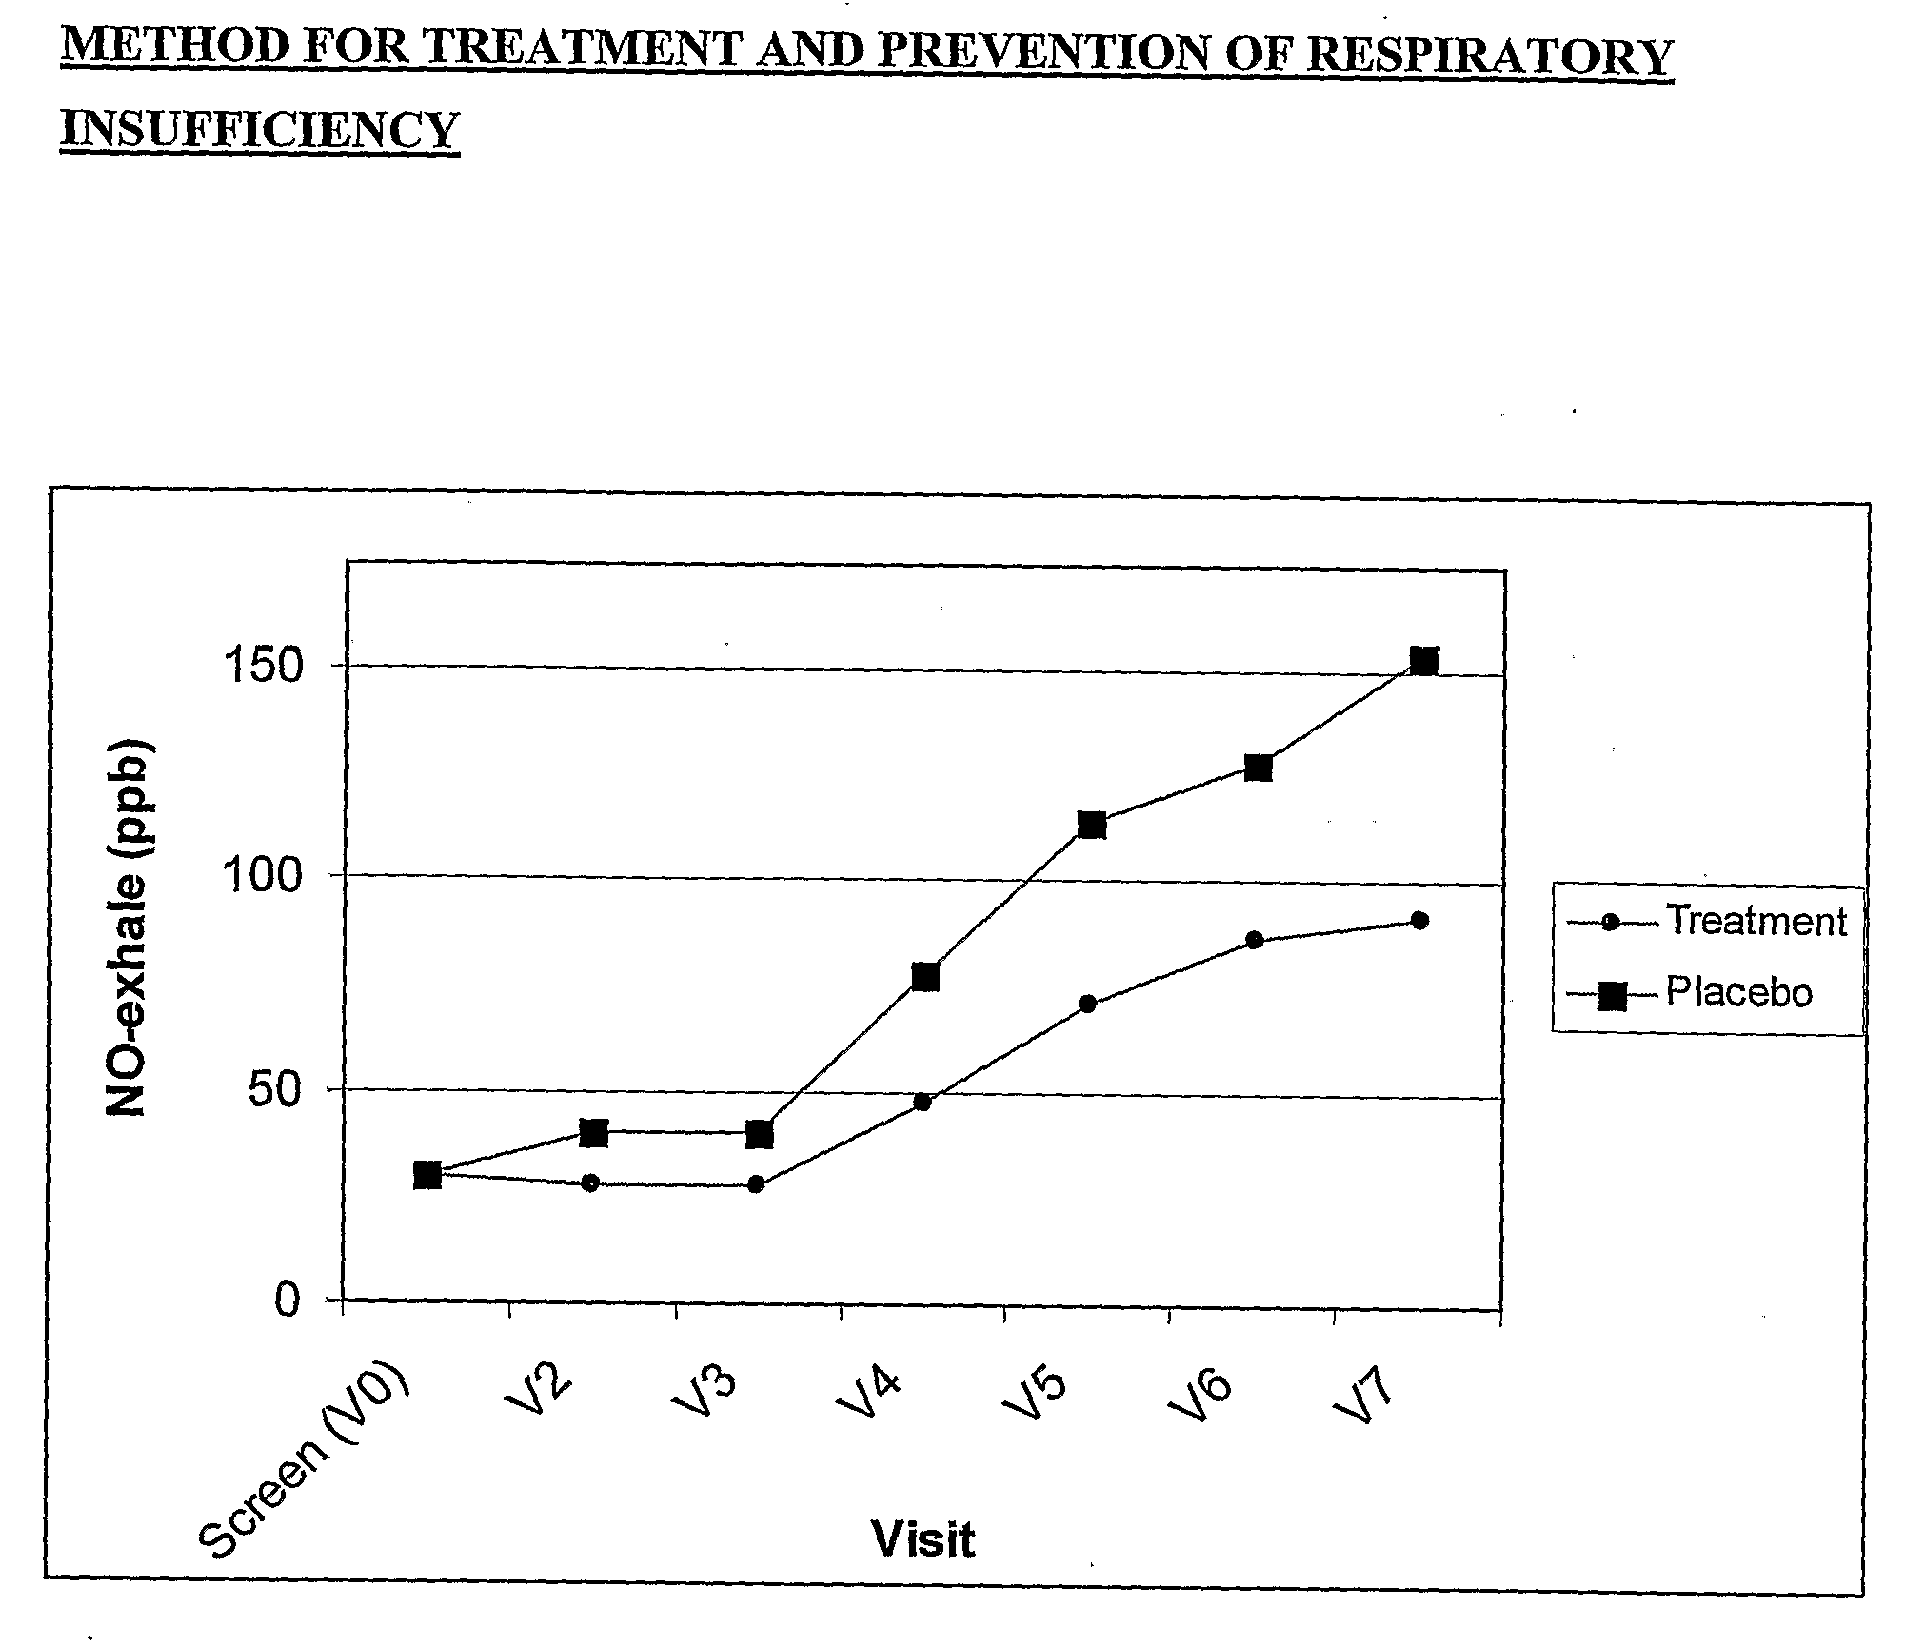 Method for treatment and prevention of respiratory insufficiency